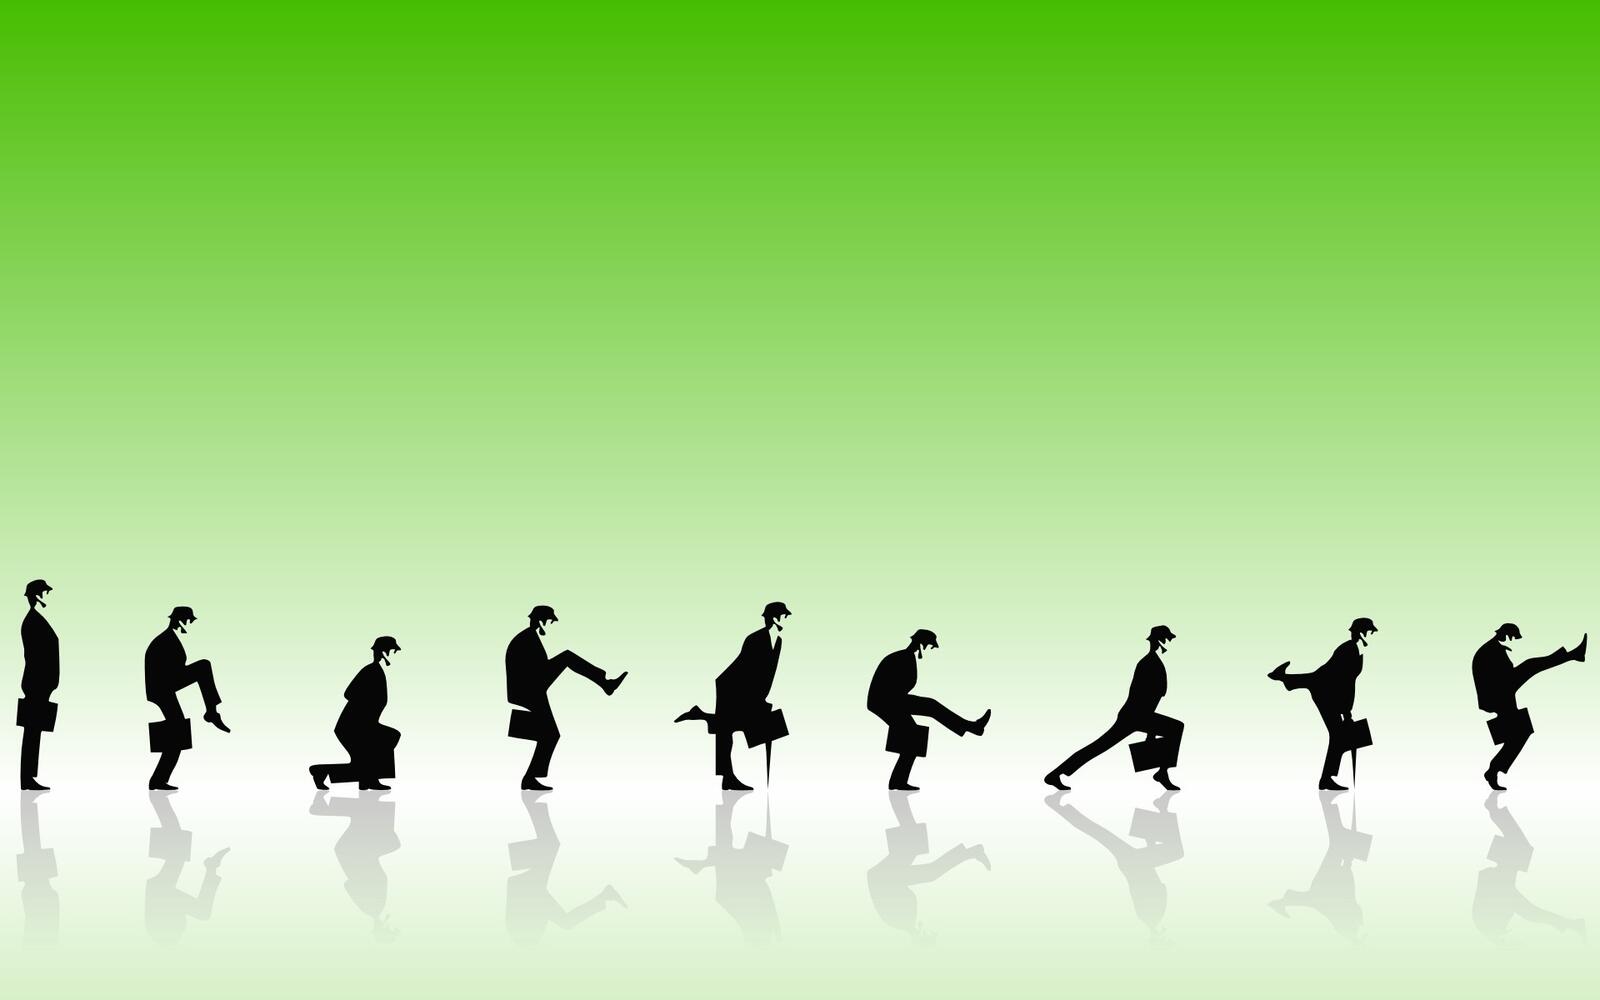 Wallpapers ministry of silly walks monty python modern dance on the desktop